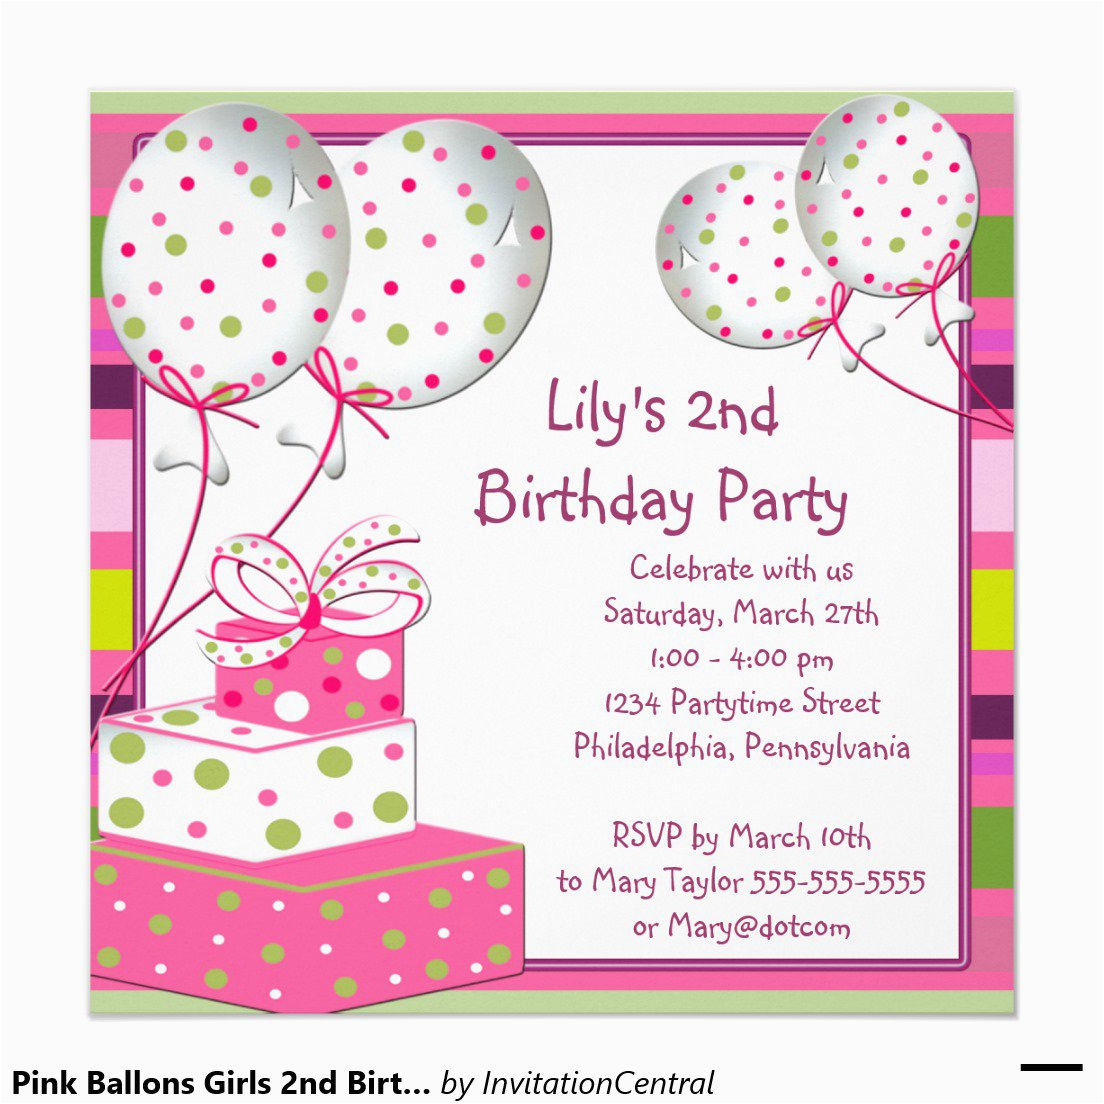 E Invites for Birthday Party Birthday Party Invitation Card Best Party